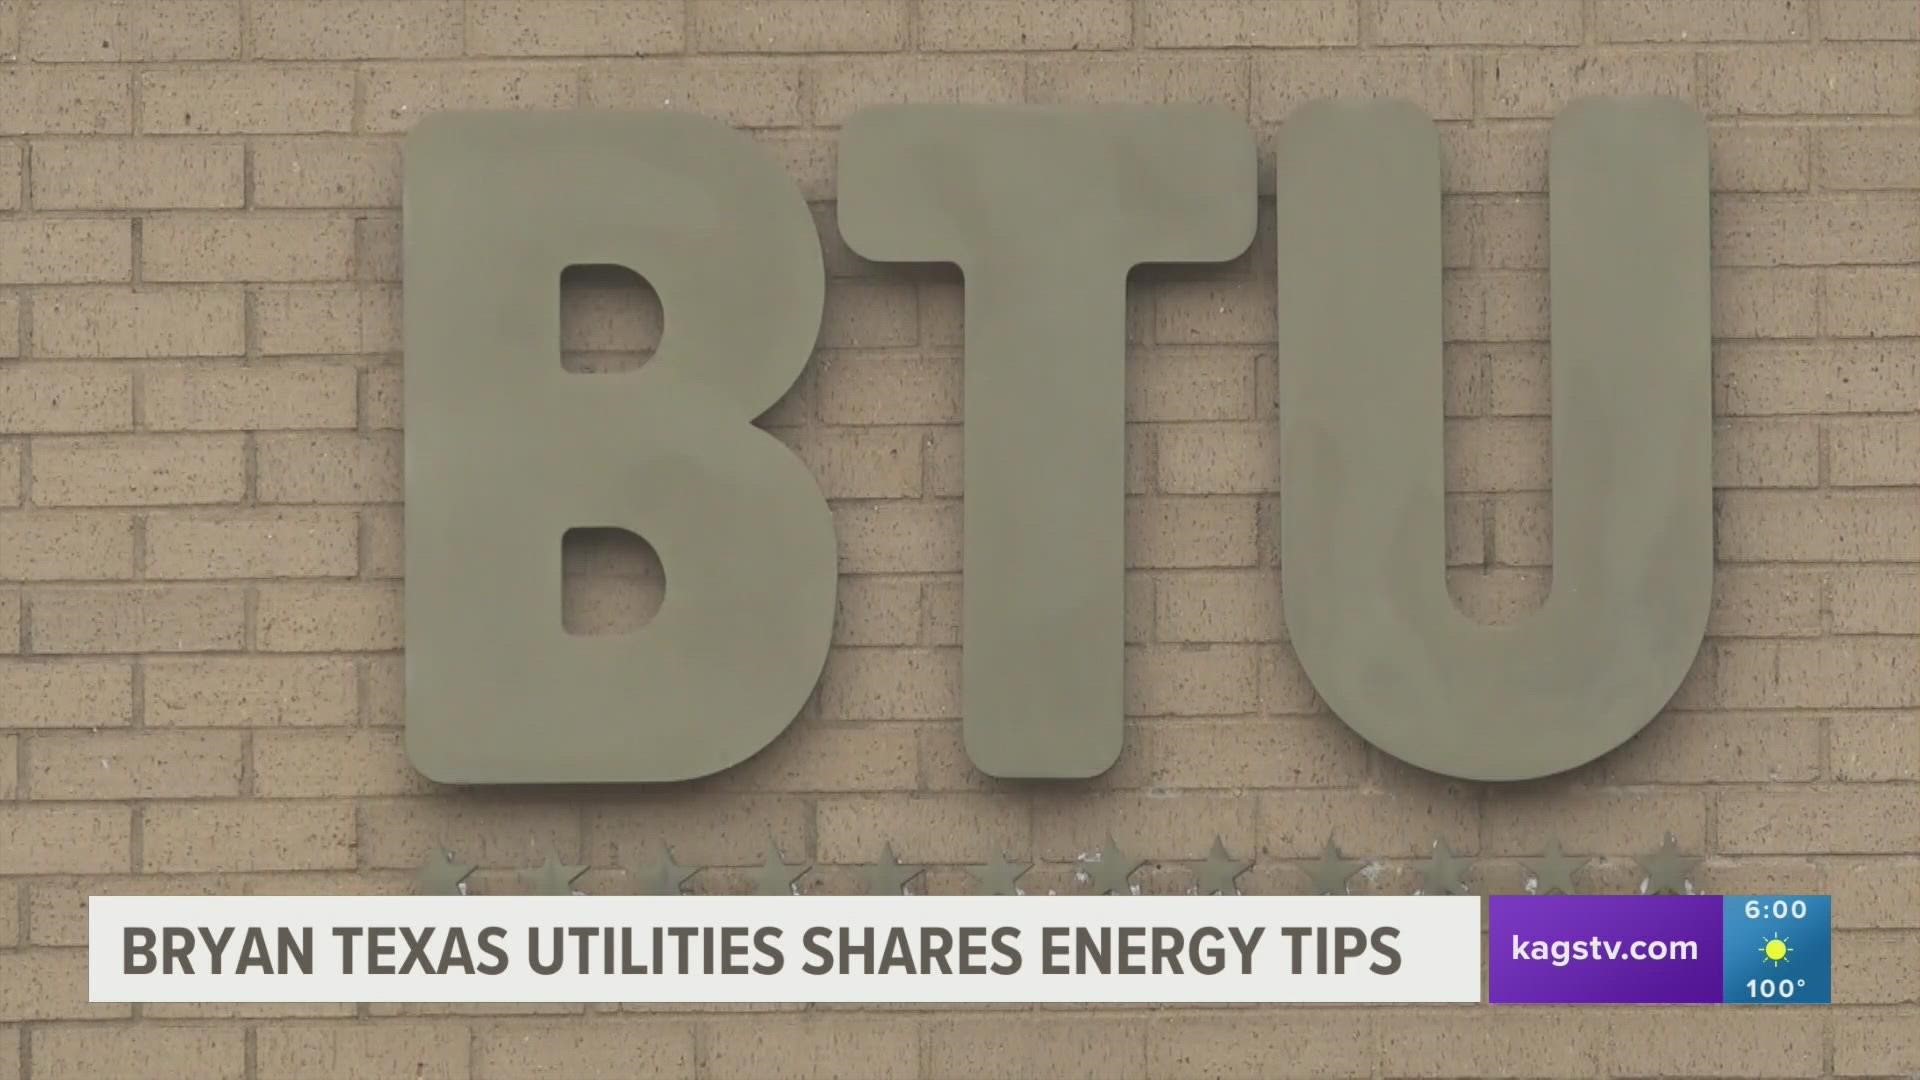 The public Information Officer for BTU said Bryan/College Station "barely" saw a peak in energy this week